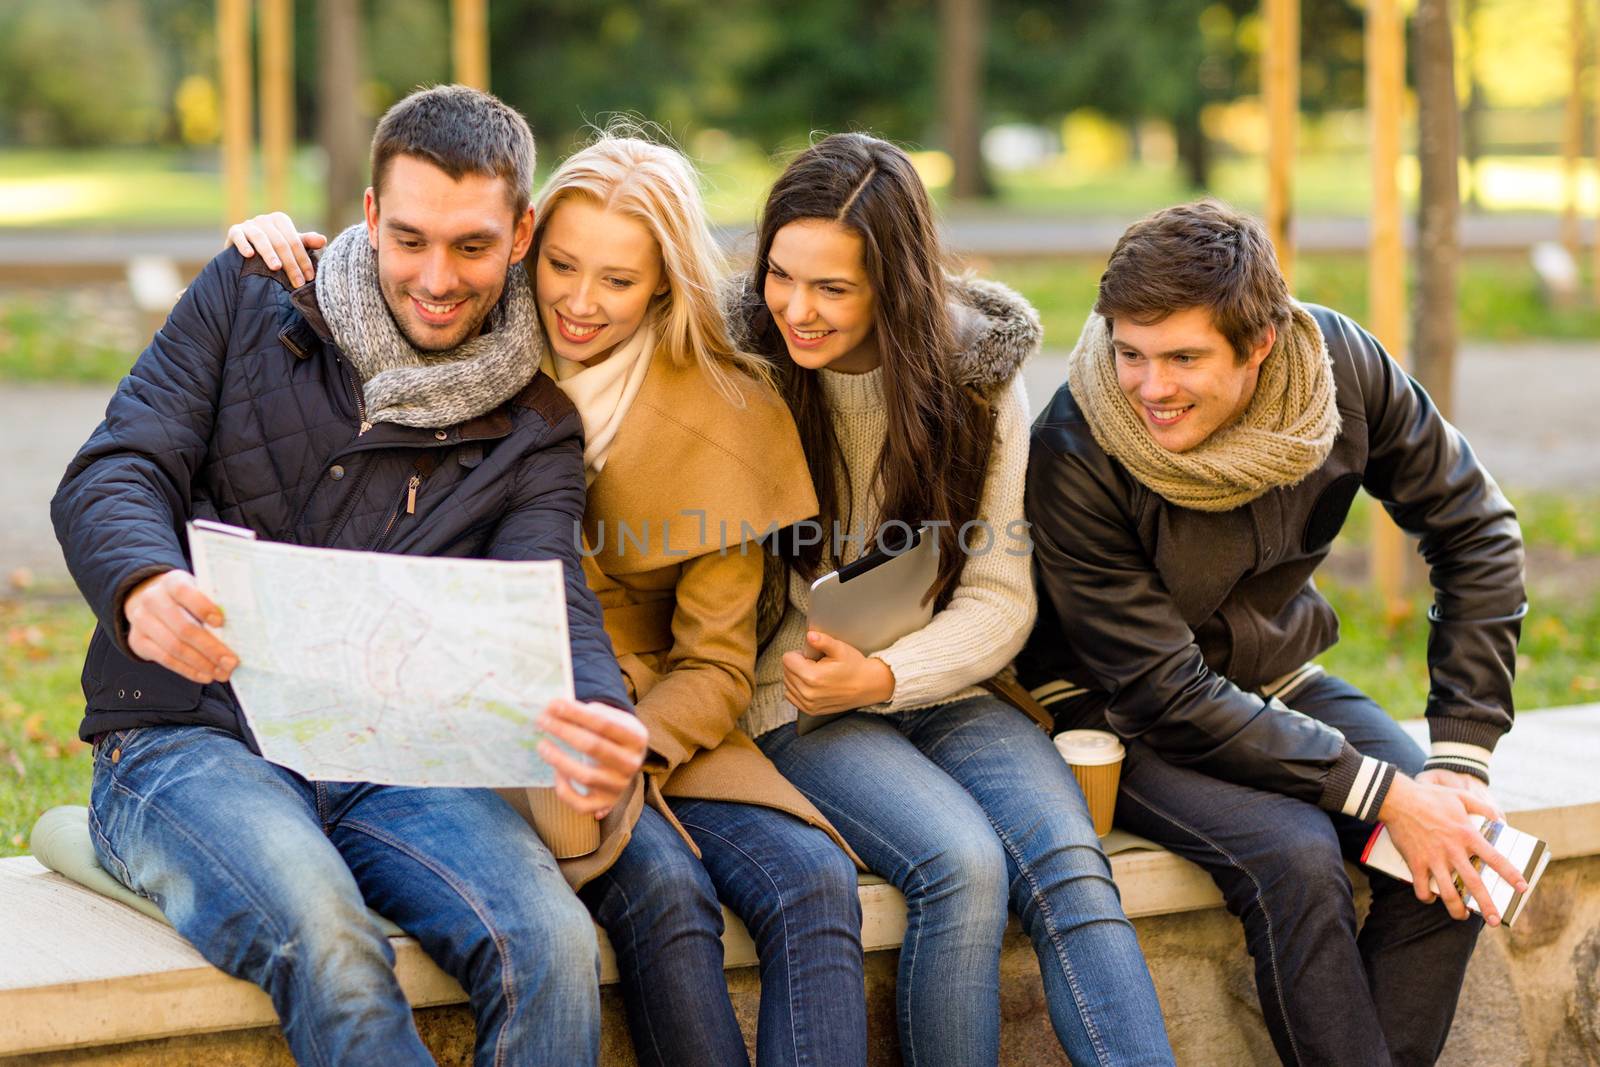 group of friends with map outdoors by dolgachov